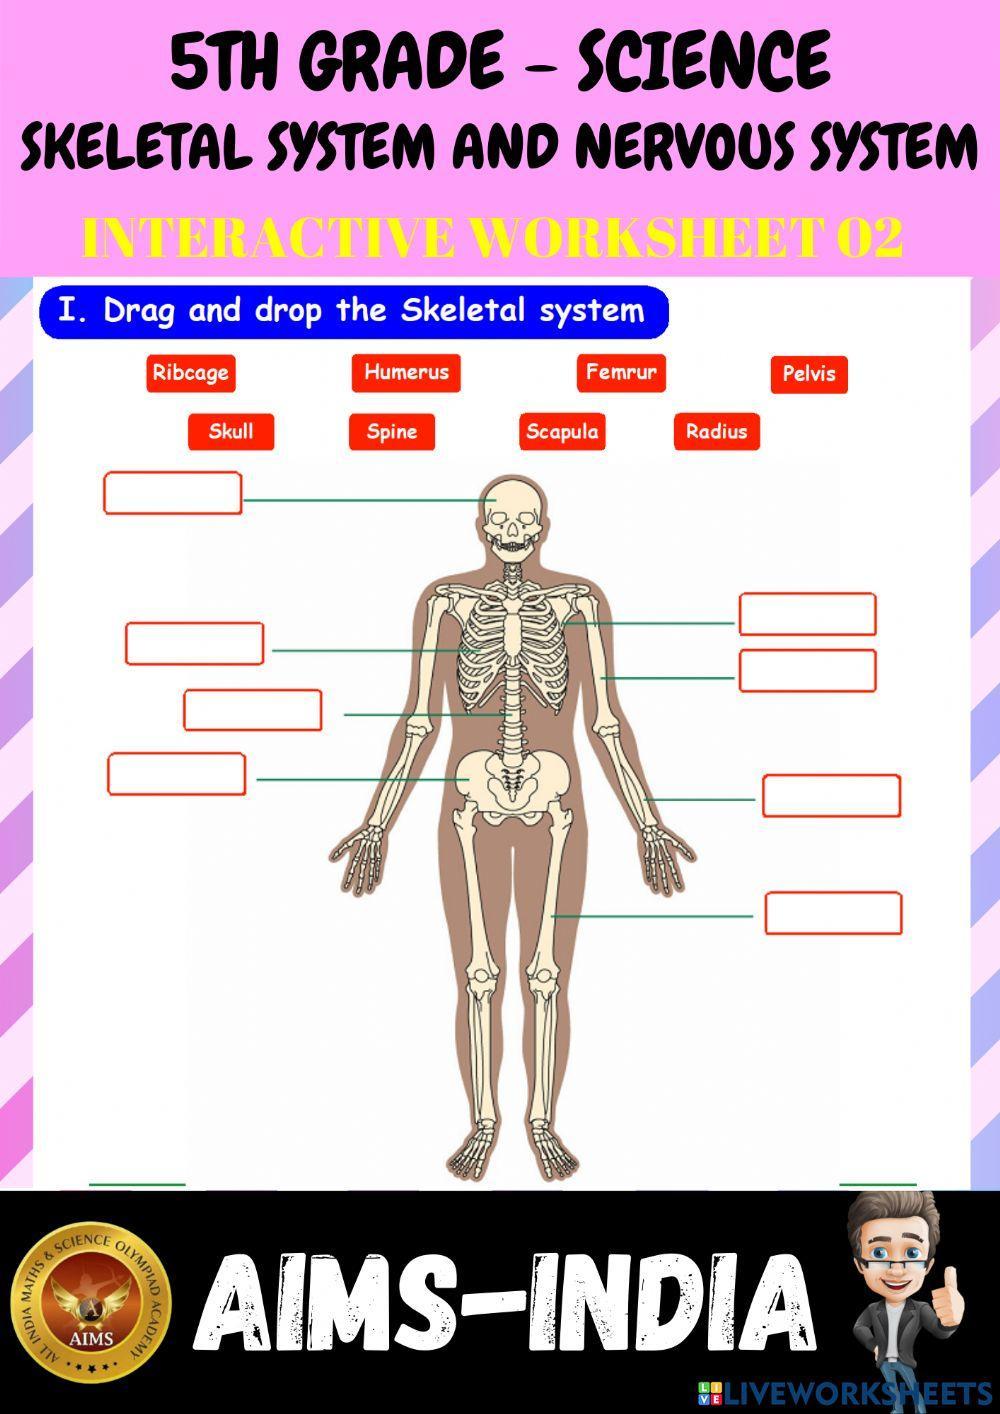 5th-science-ps02- skeletal system and nervous system